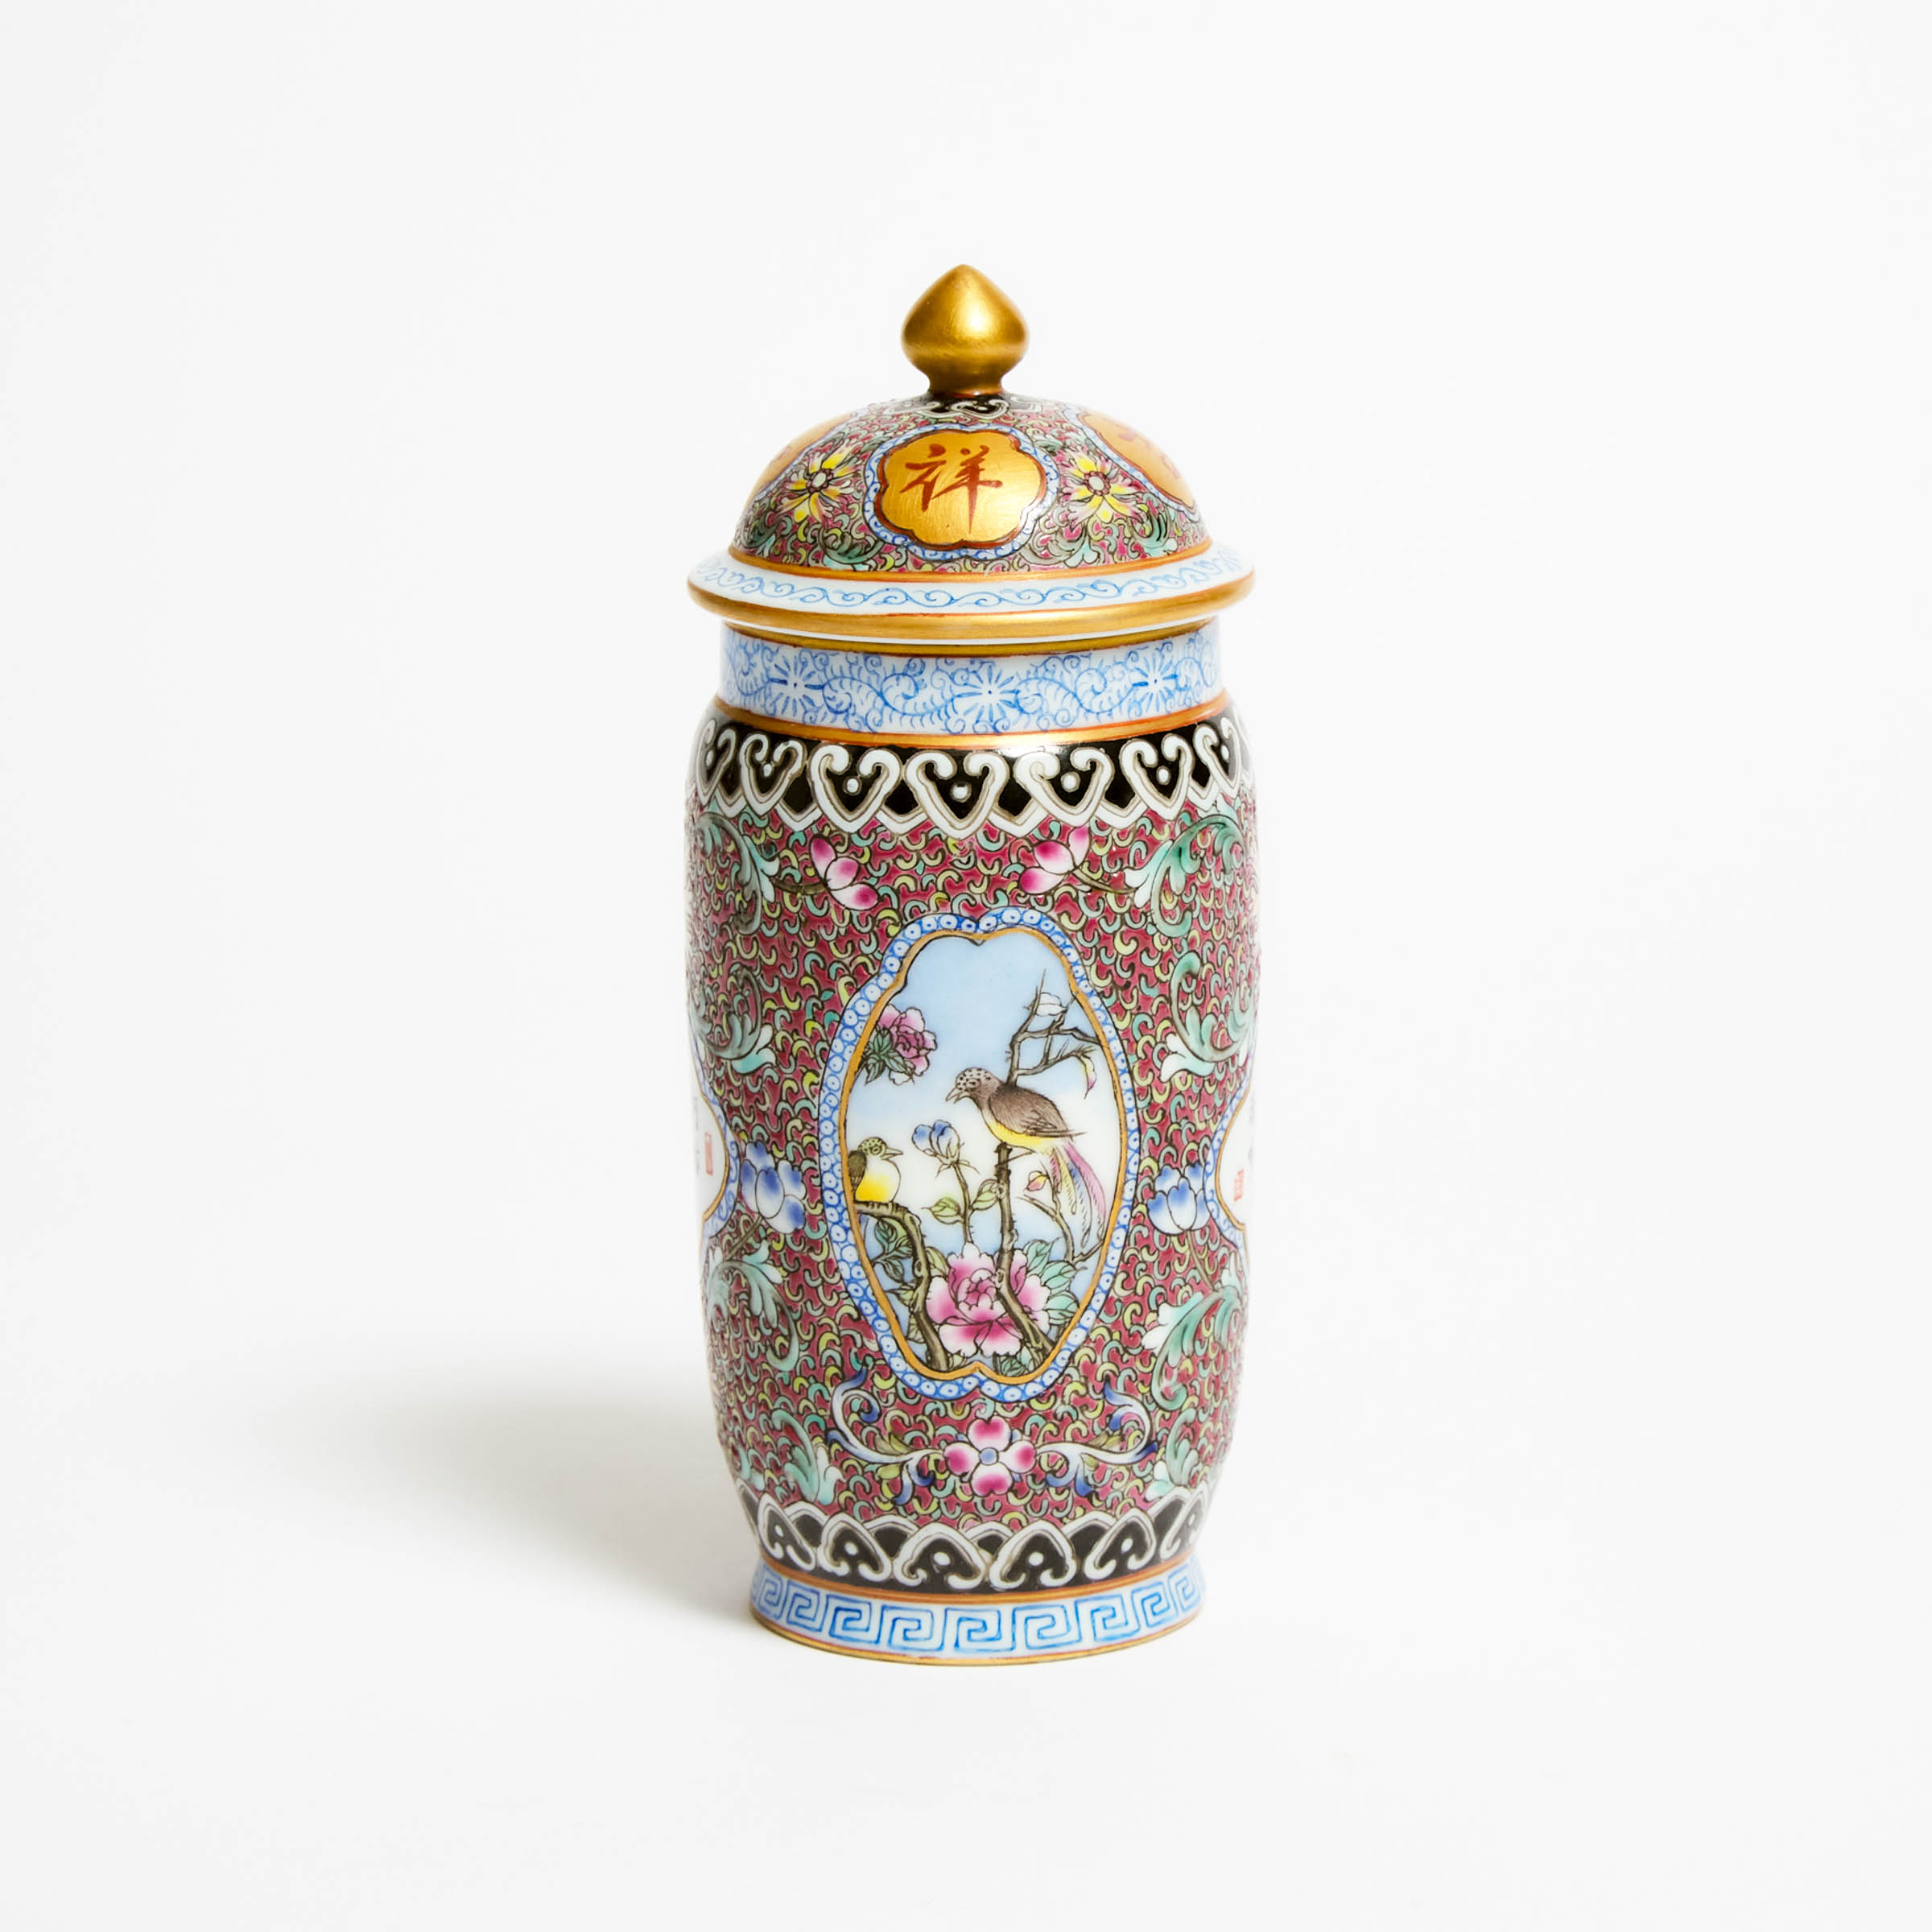 A Gilt-Decorated Famille Rose Lantern